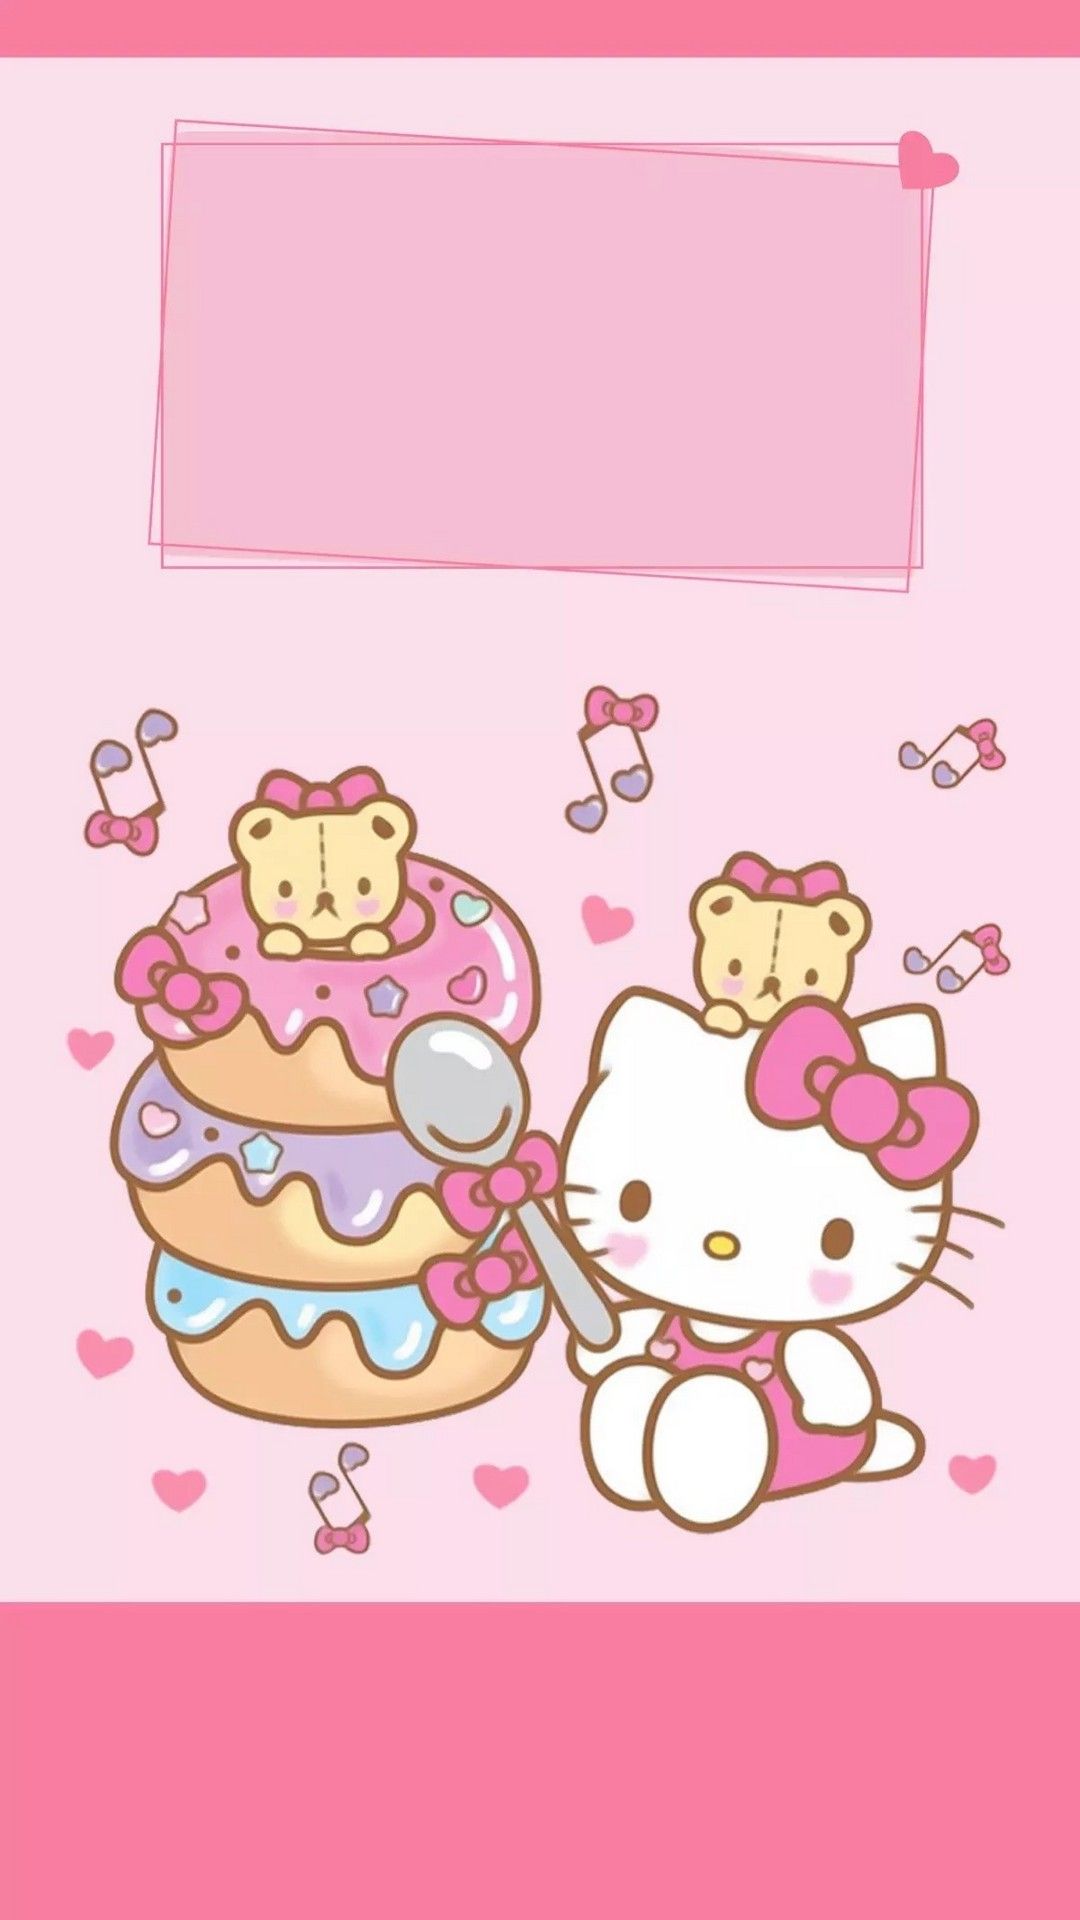 Hello Kitty iPhone 7 Wallpaper. Best Wallpaper HD. Hello kitty iphone wallpaper, Hello kitty background, Hello kitty picture